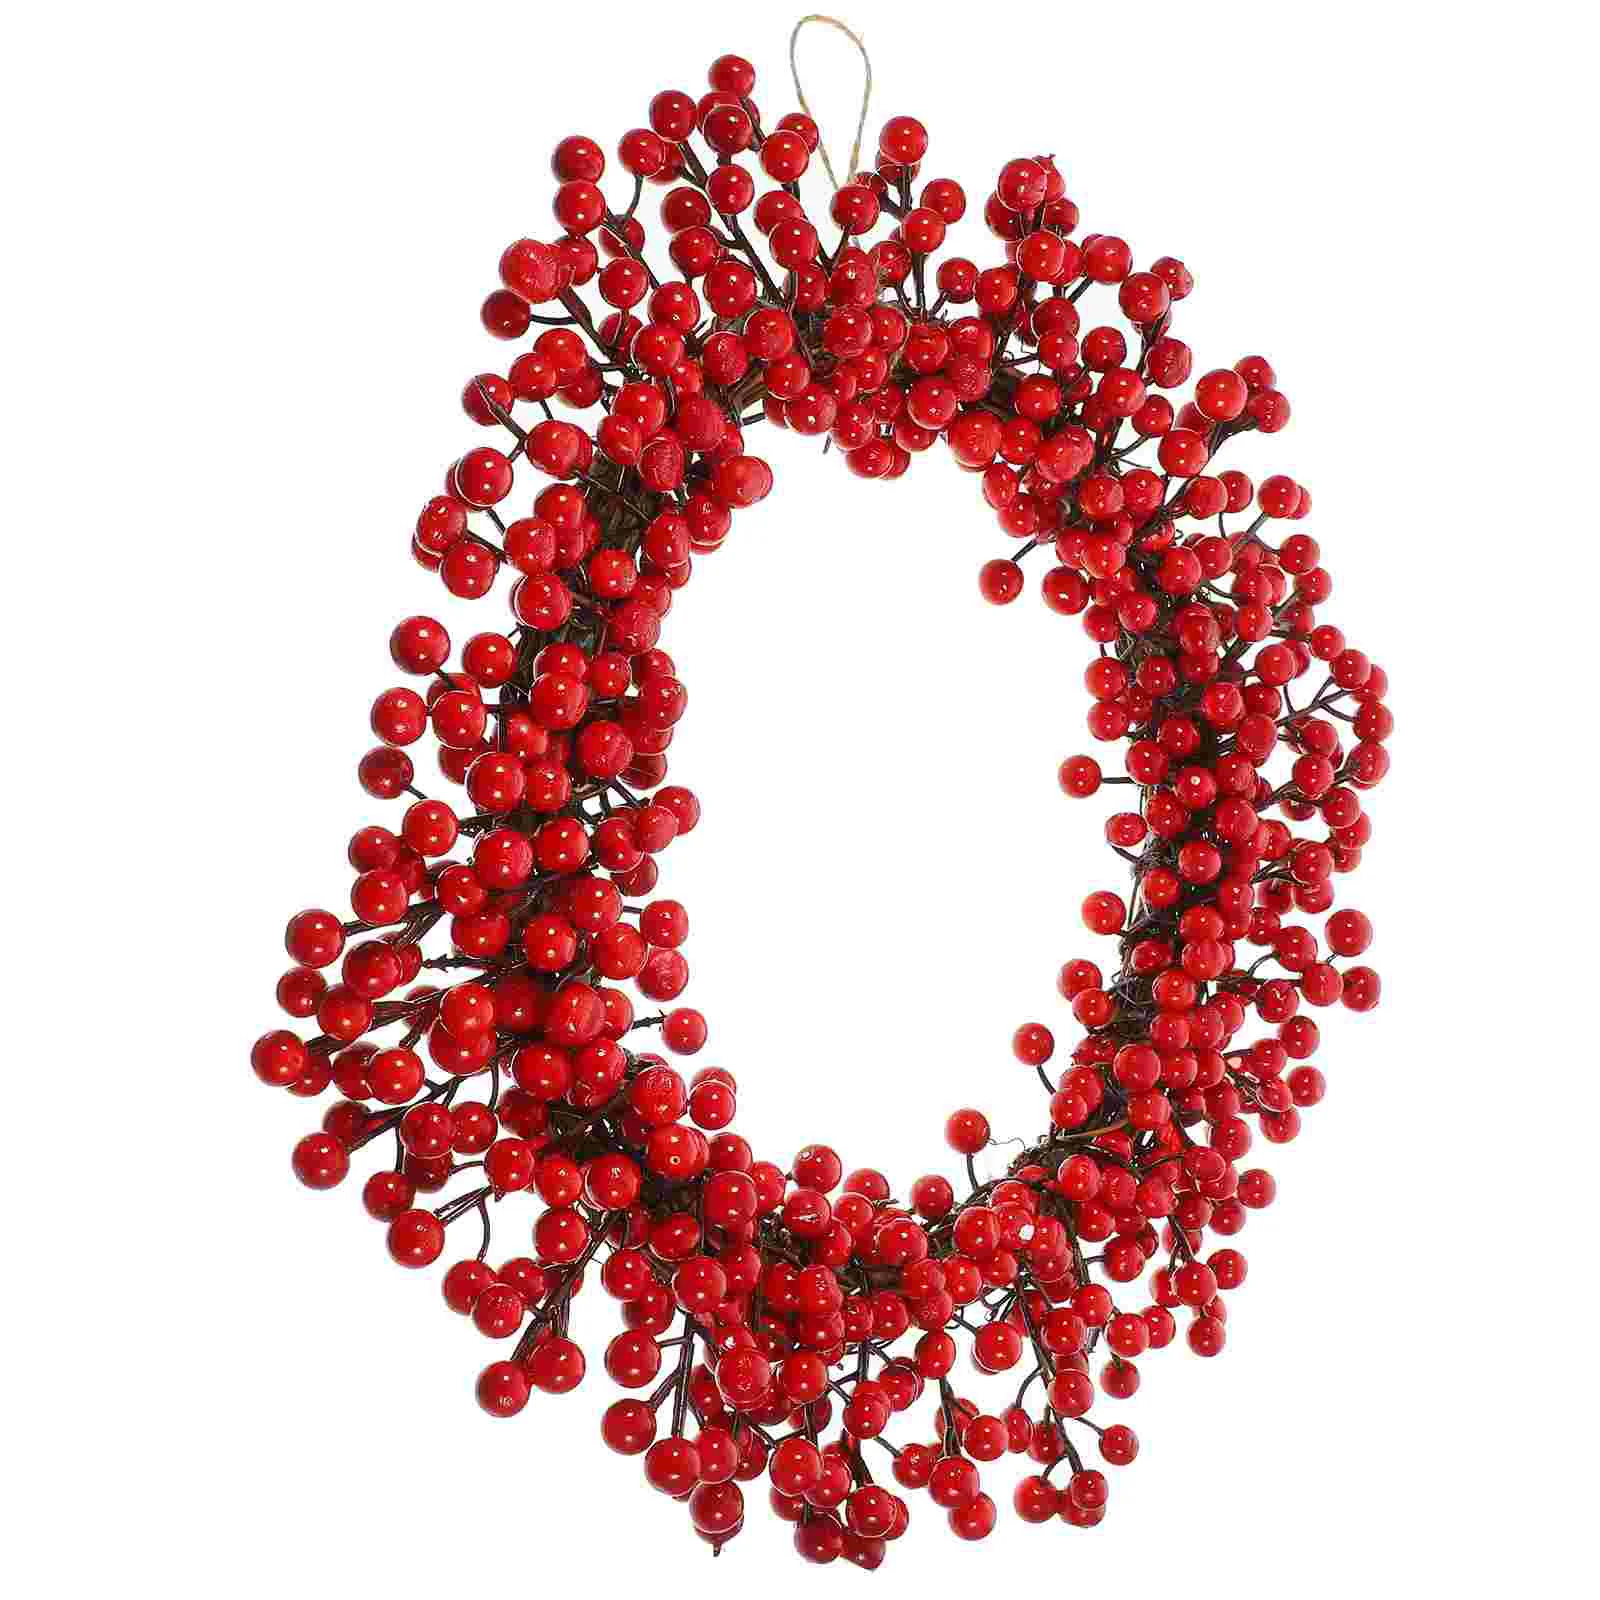 

Hanging Wreath Ornaments Christmas Front Door Garland Decorations Festival Scene Artificial Berry